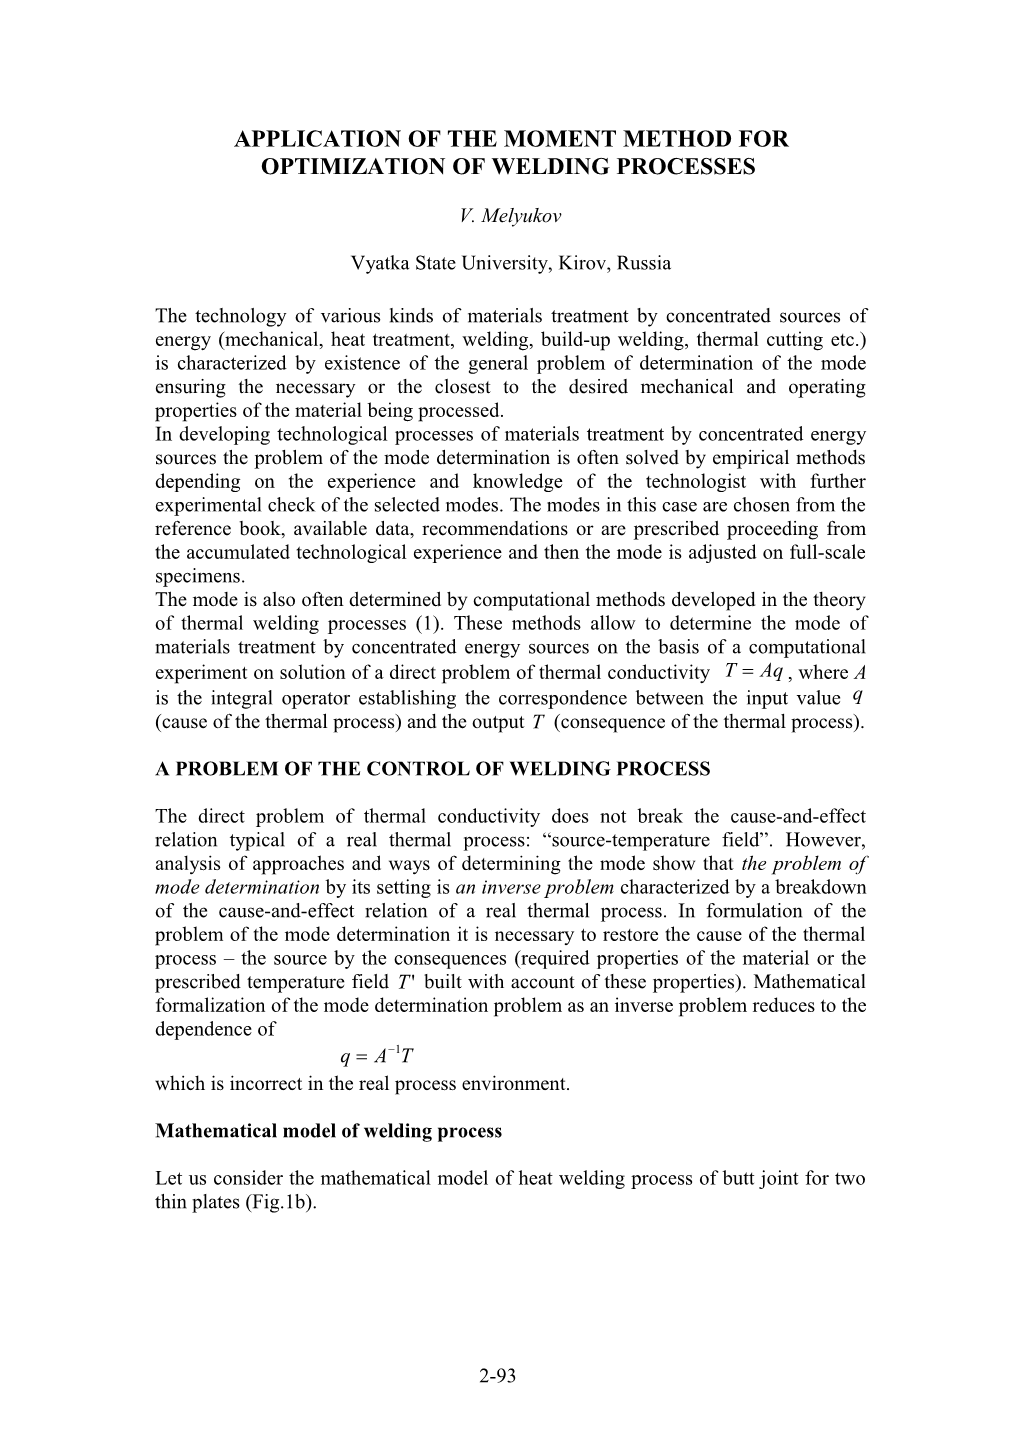 Application of the Moment Method for Optimization of Welding Processes